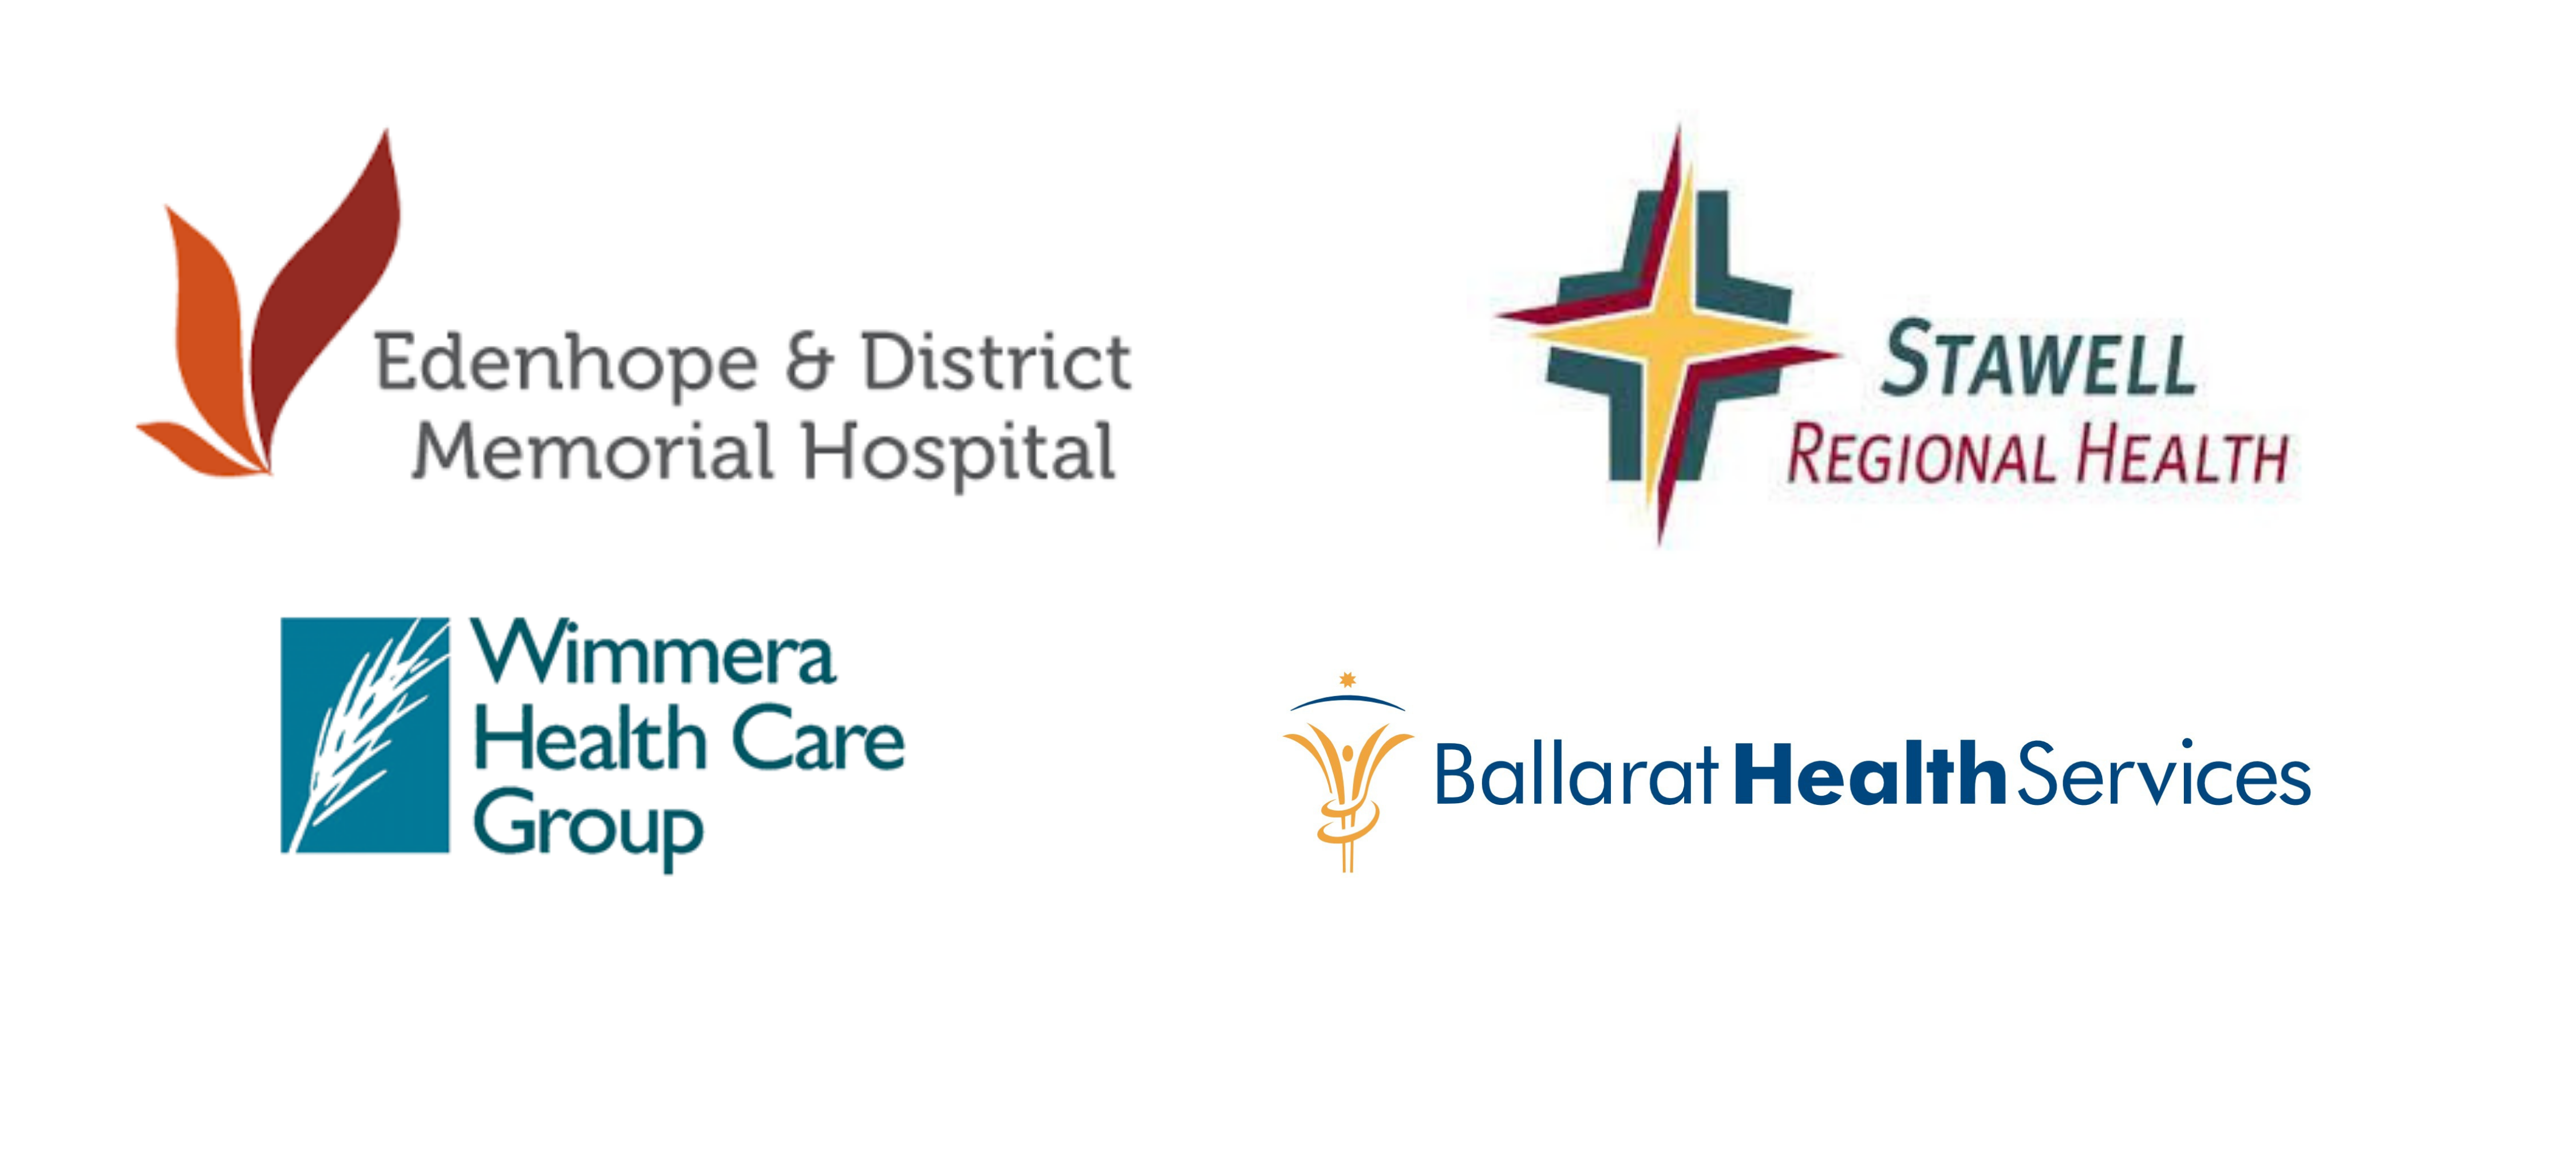 Joining together across our region for better healthcare